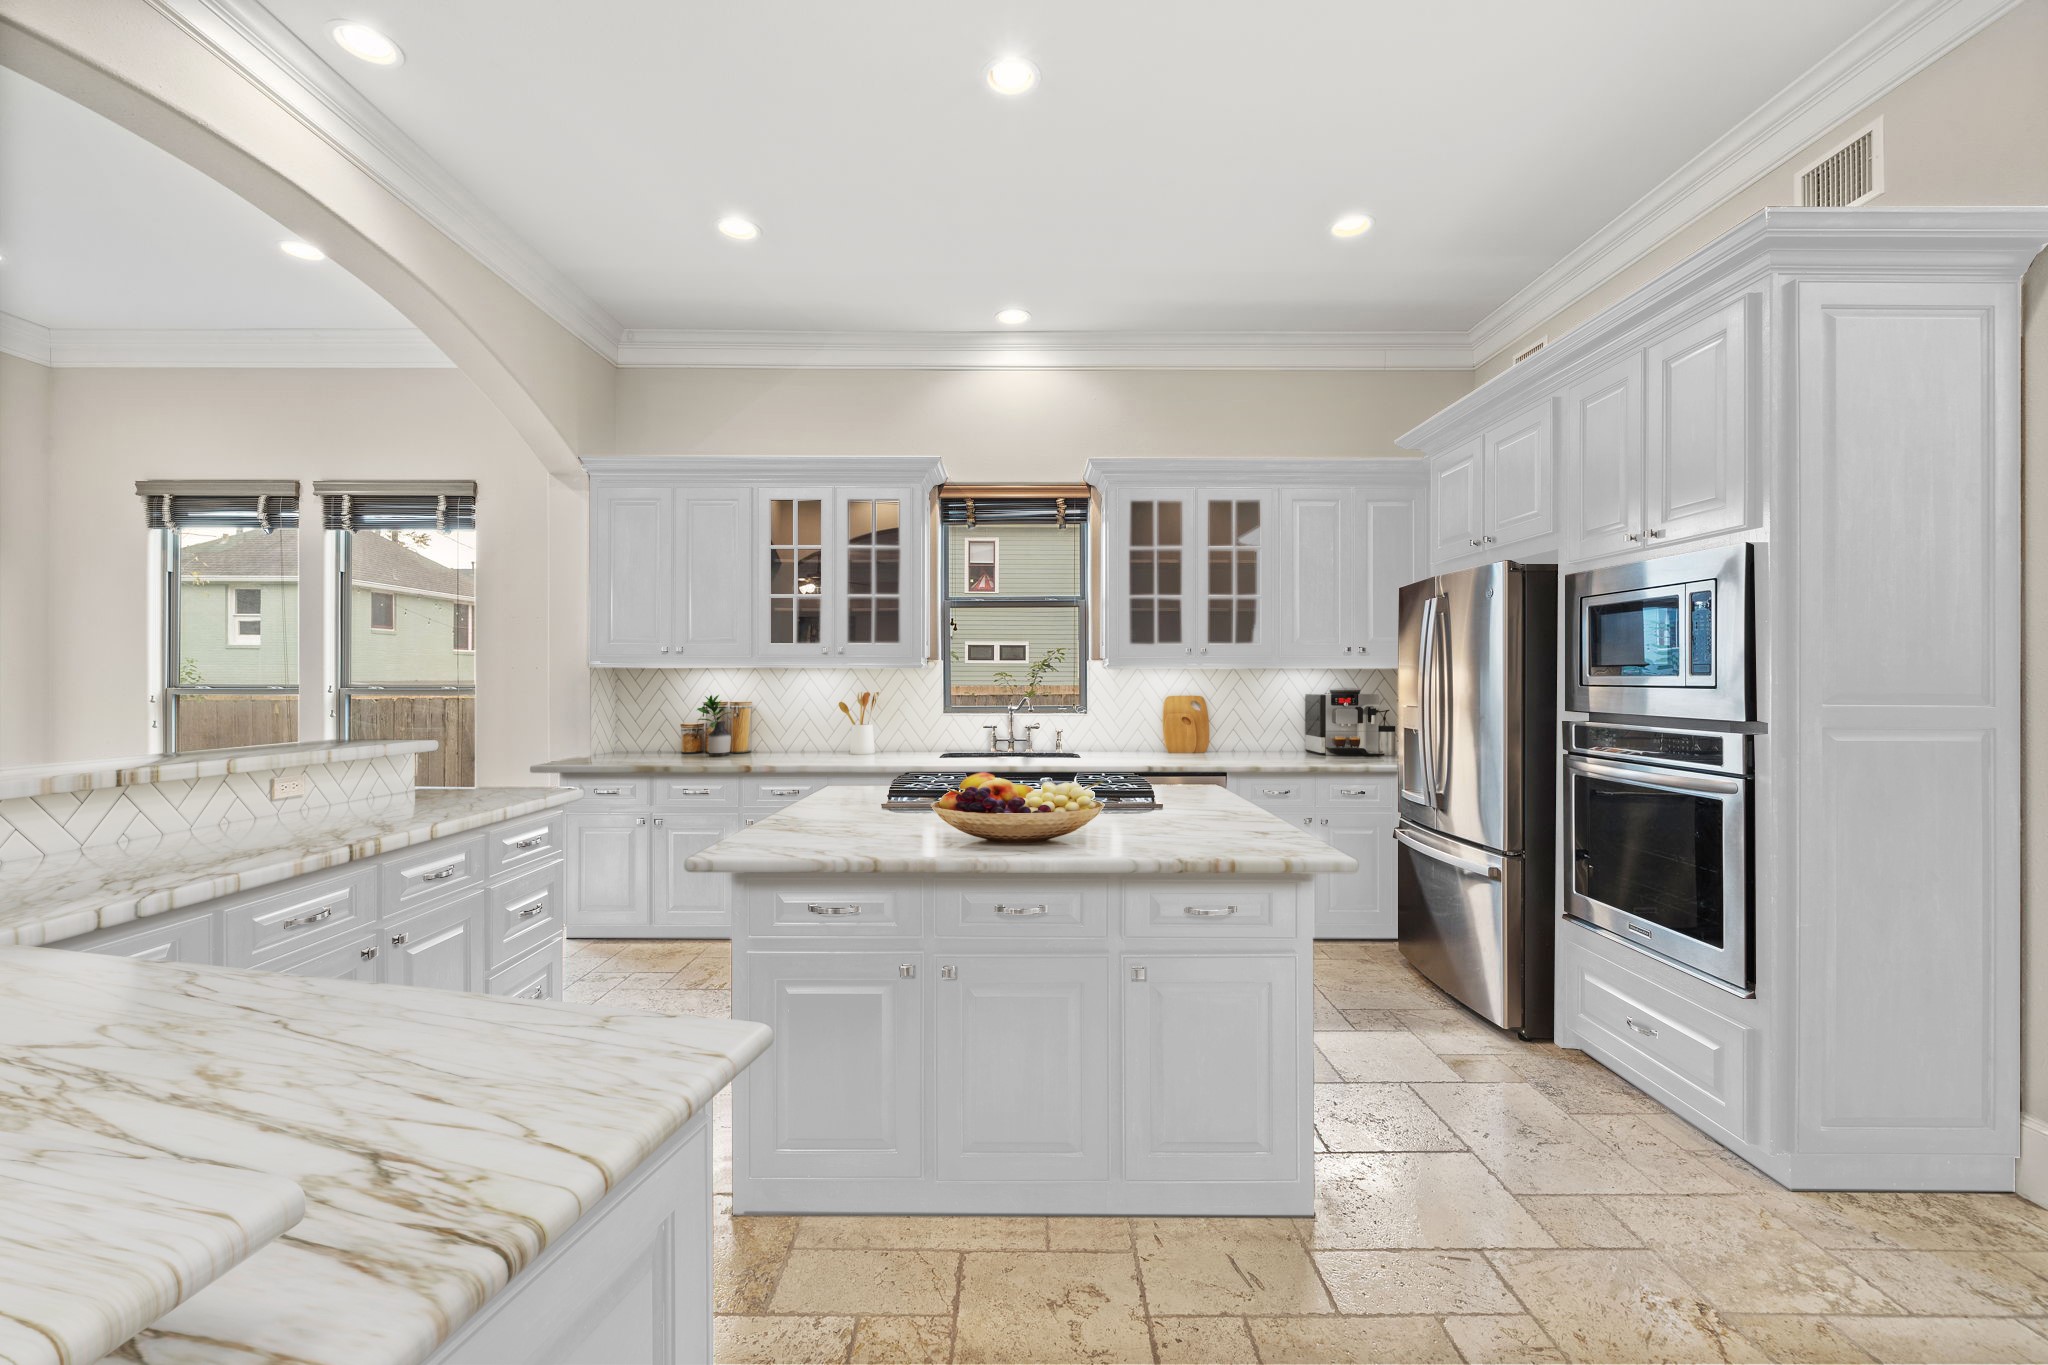 This is a virtual image to show the kitchen if you wanted to paint the cabinets white and replace the countertops and backsplash.